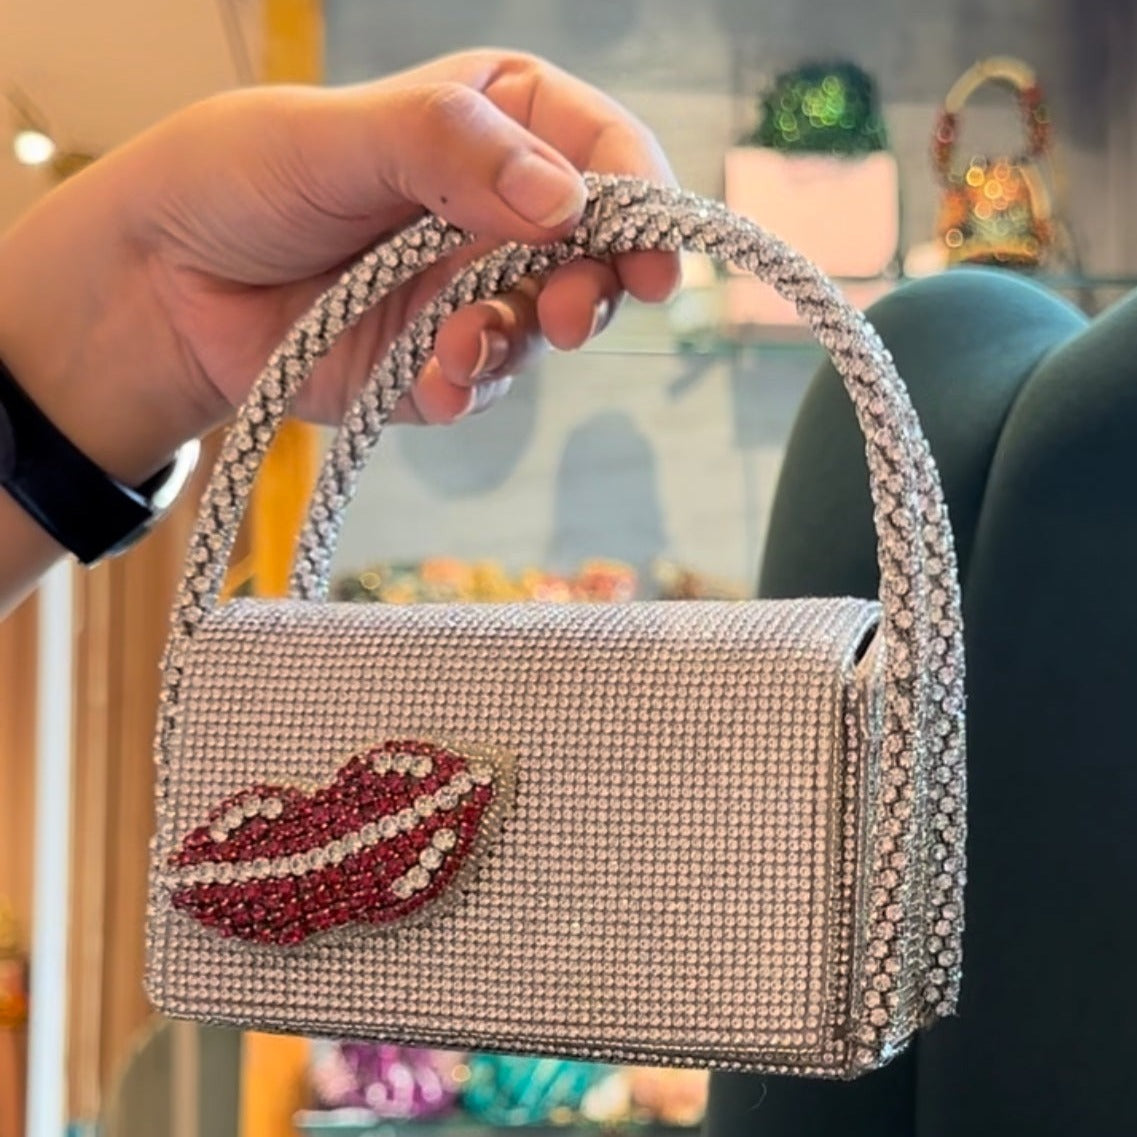 Mini dazzle bag with charms